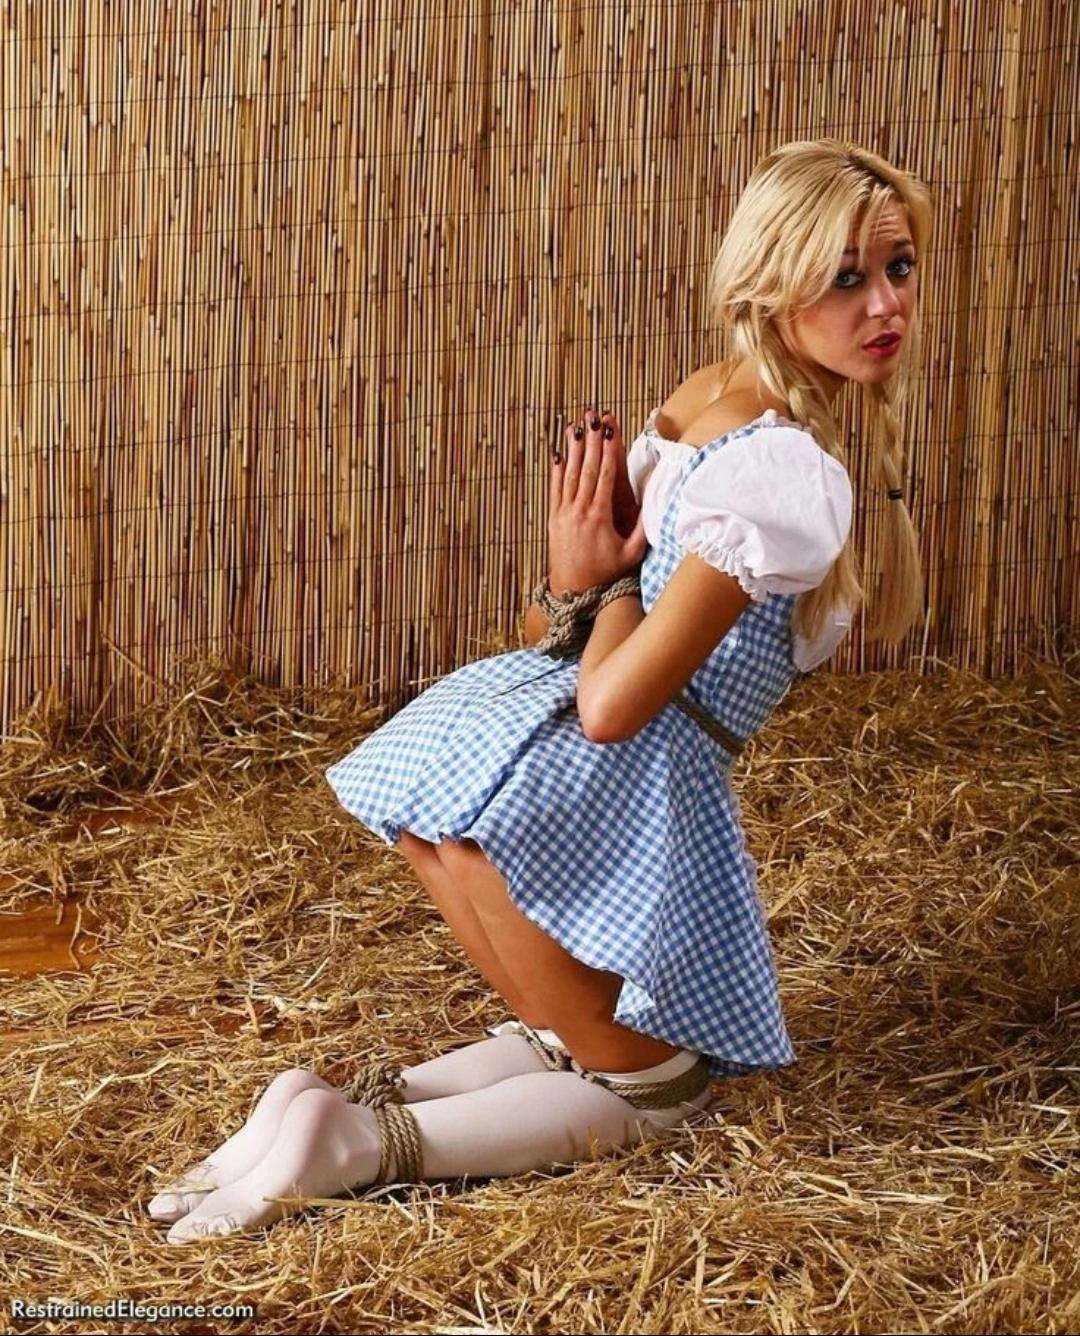 German girl bound in the barn image